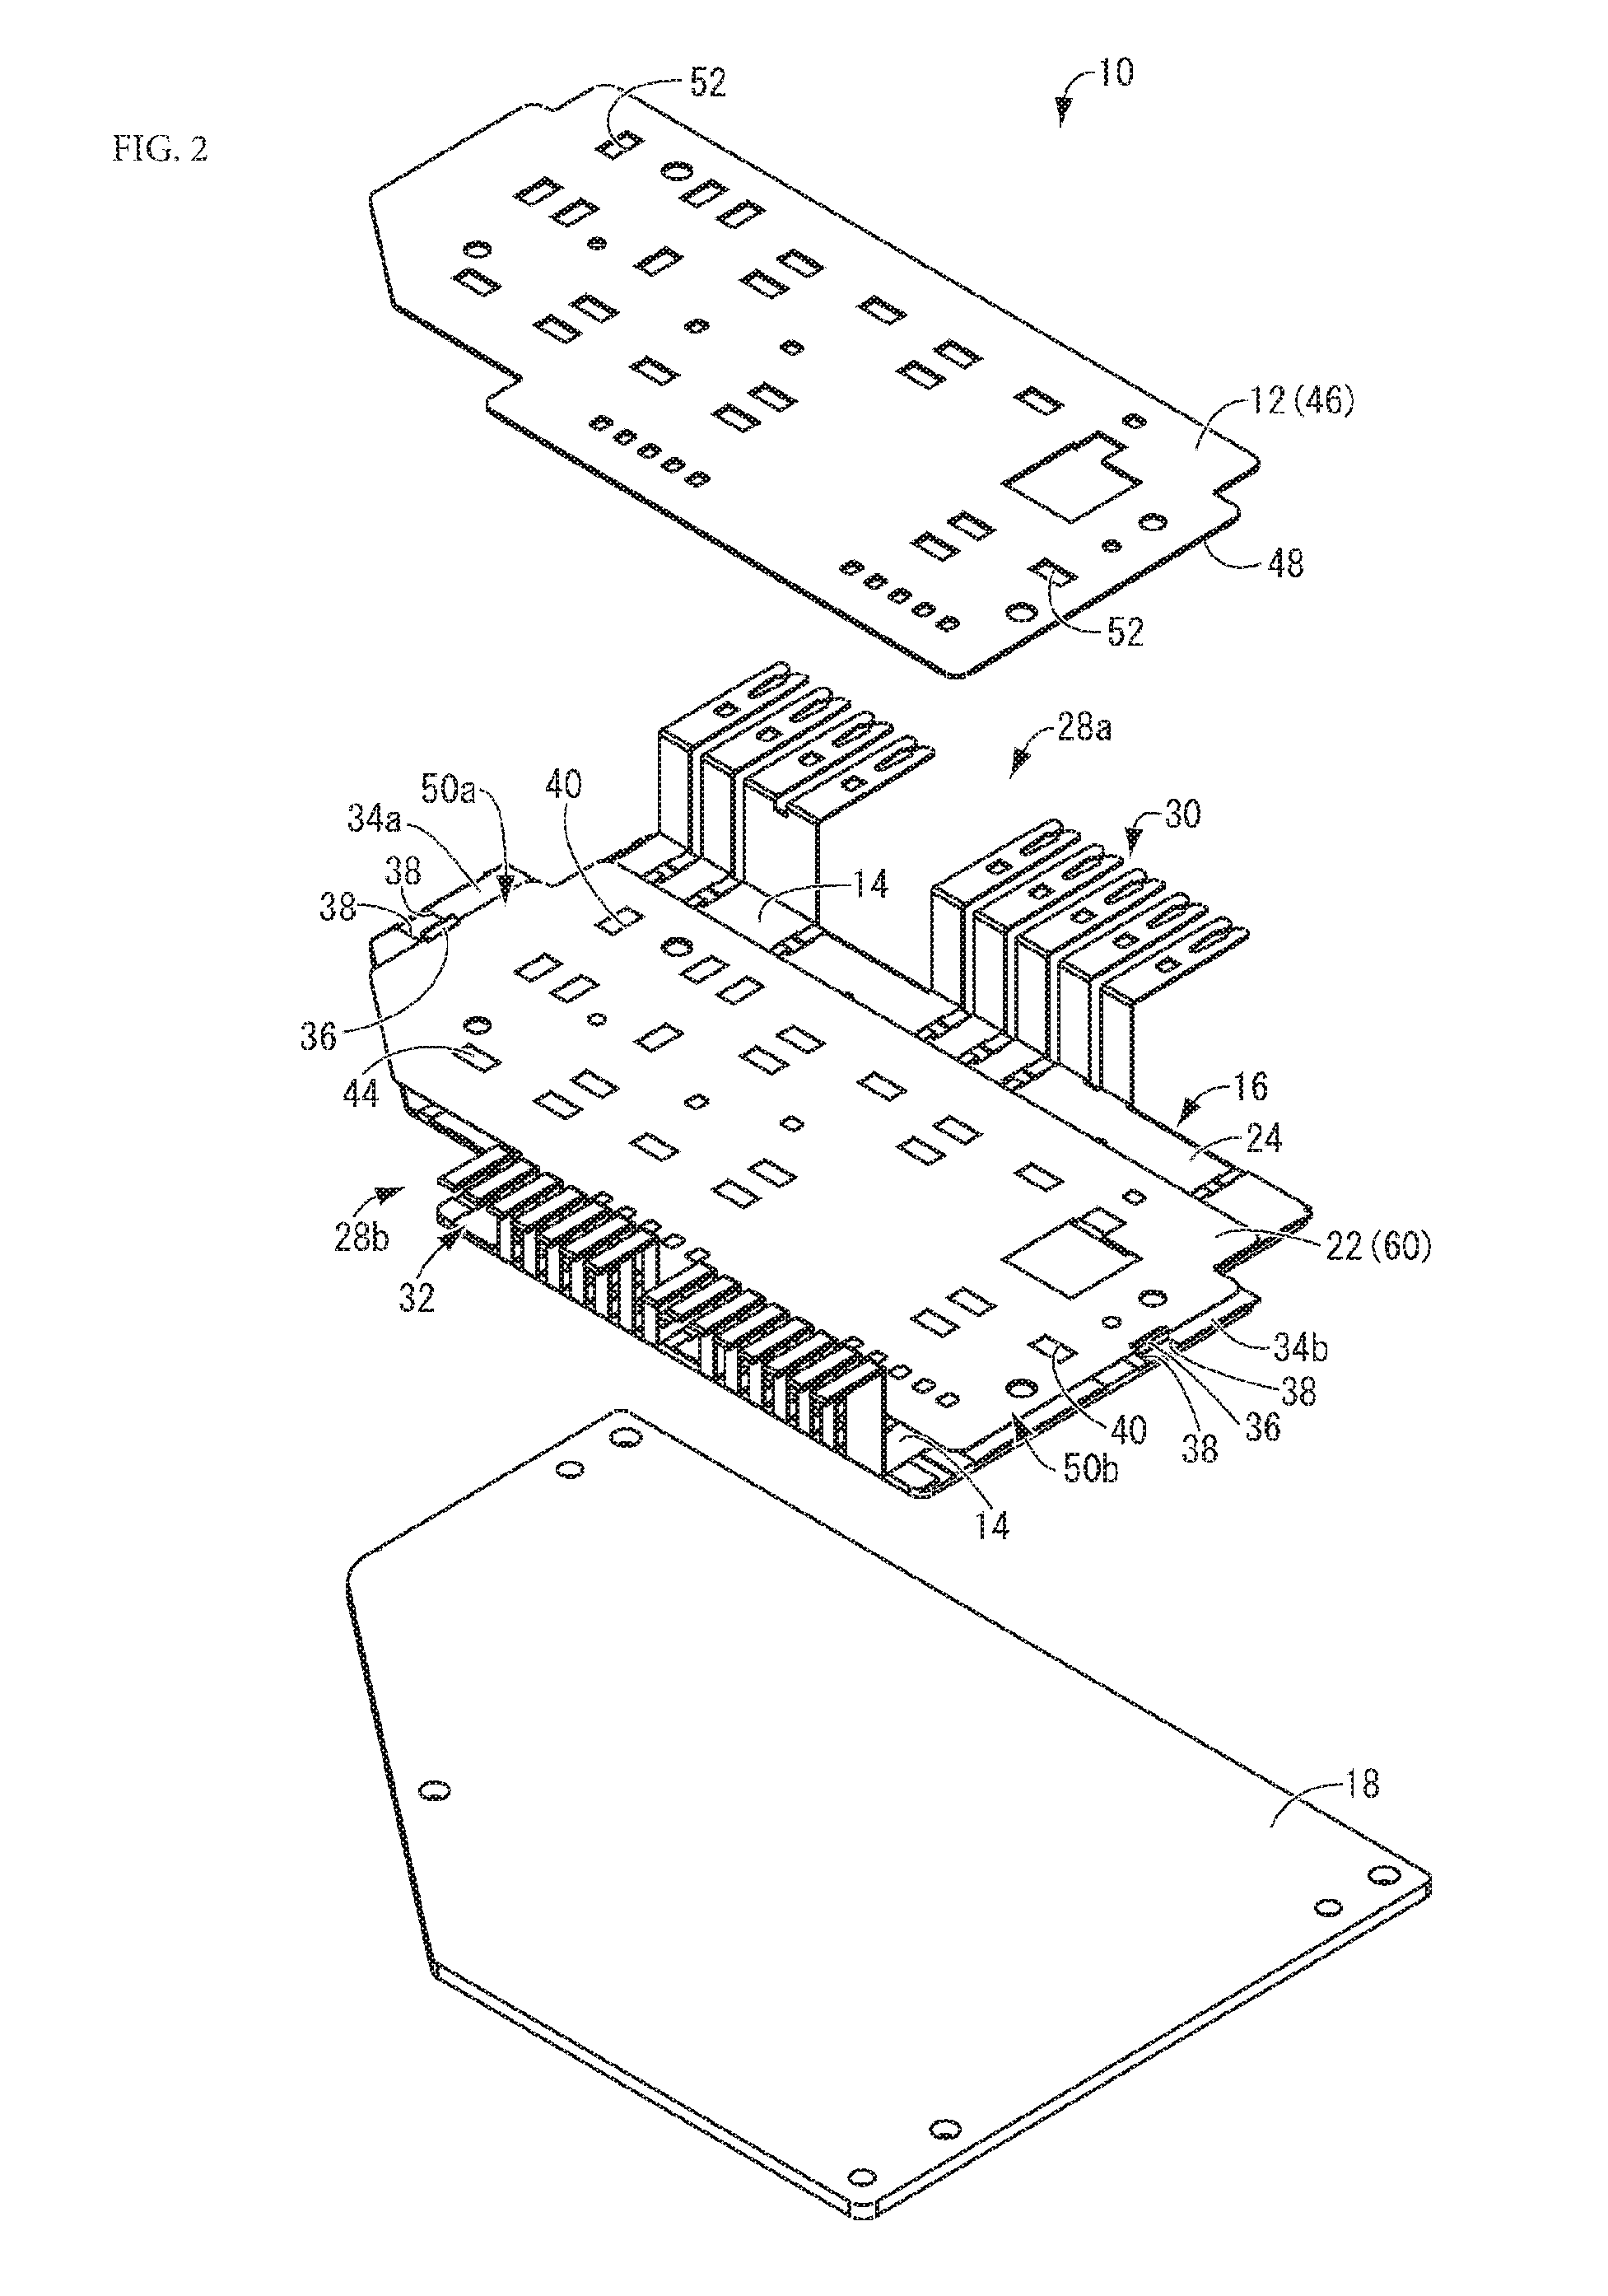 Circuit assembly